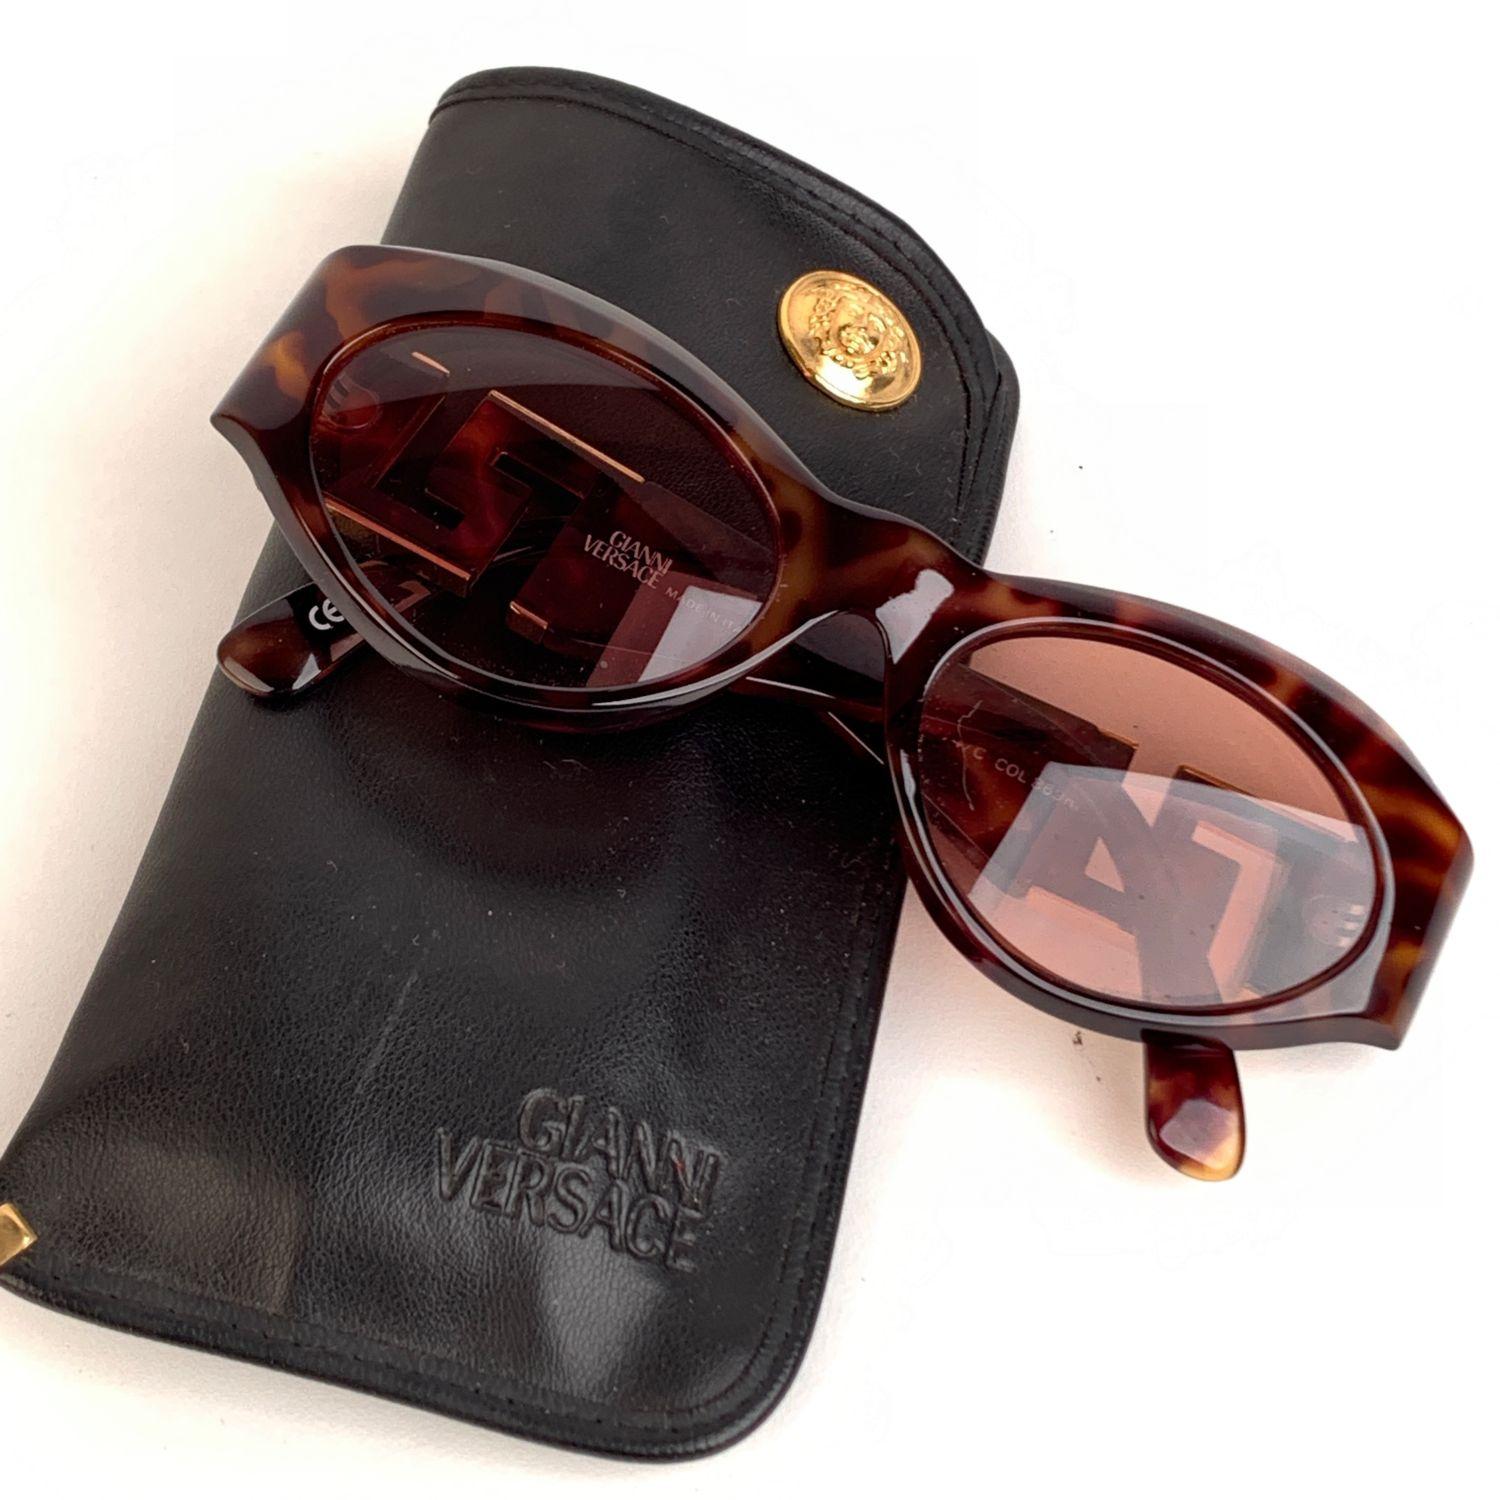 Beautiful vintage Gianni Versace Mod T 94/C - Col. 869RH sunglasses. Tortoise acetate frame with gold metal accents and rhinestones on temples.Original brown lenses. Made in Italy.




Details

MATERIAL: Acetate

COLOR: Brown

MODEL: Mod